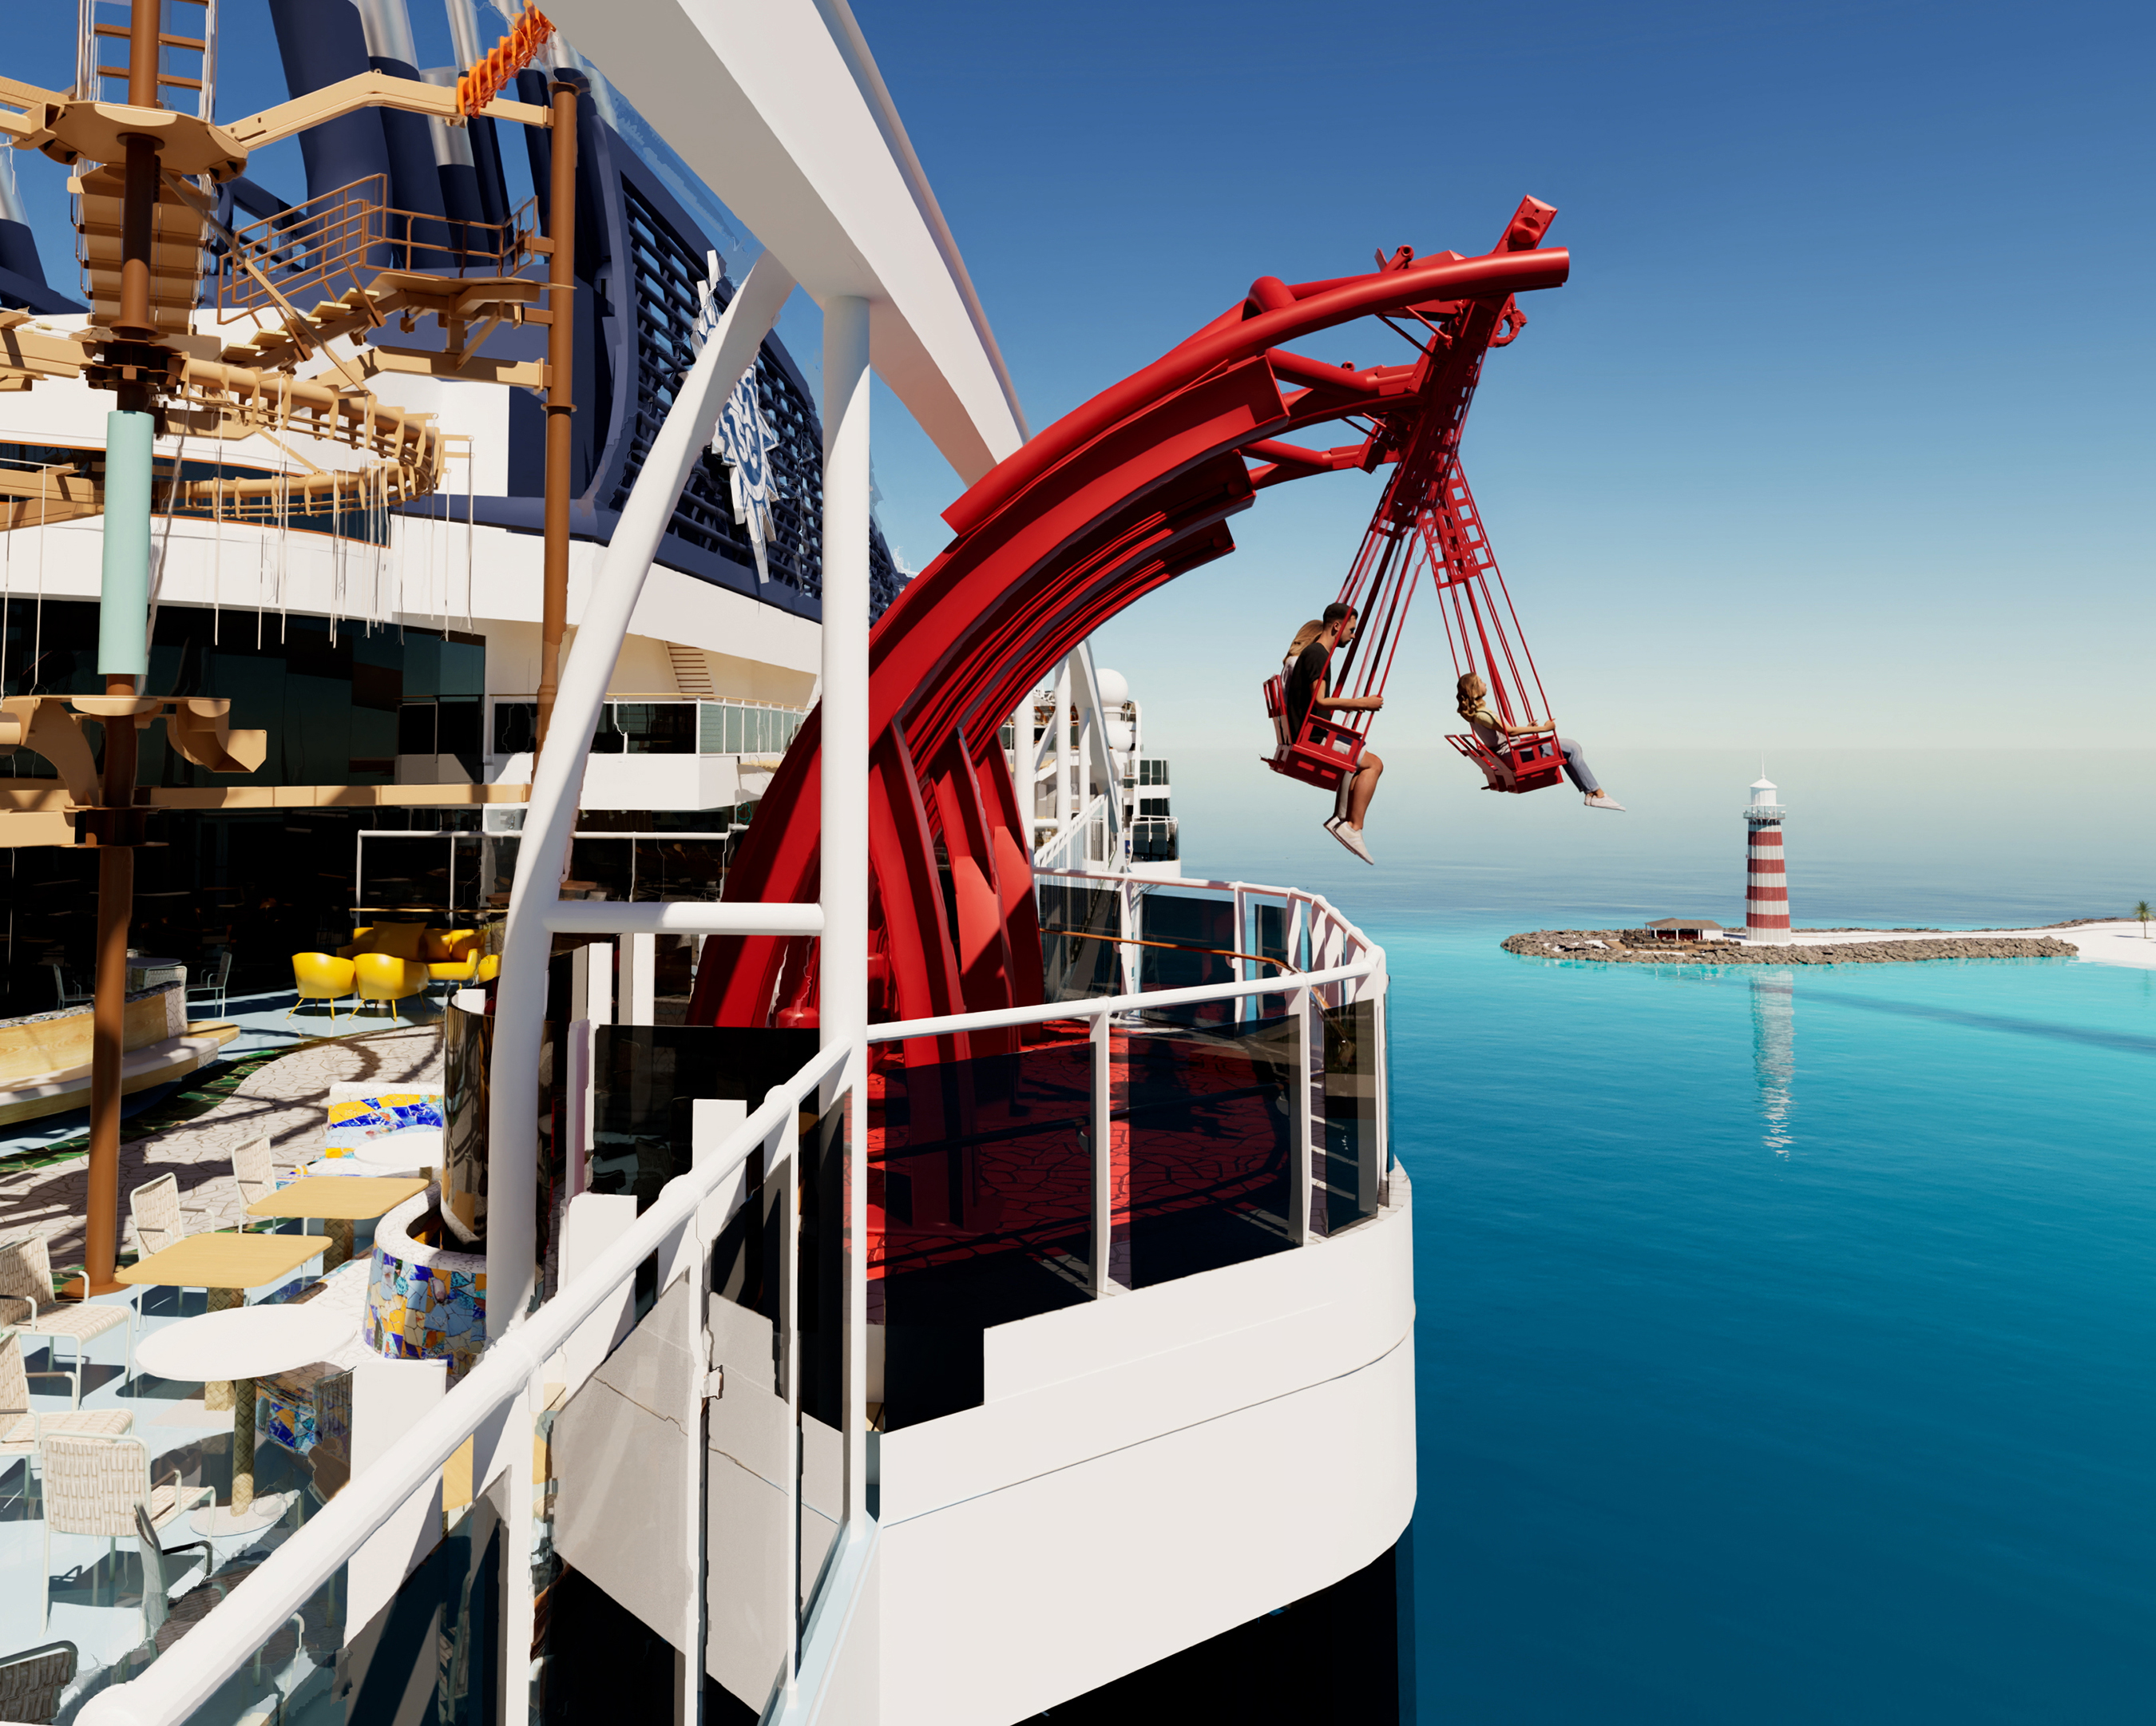 “Cliffhanger” Coming To Miami’s Newest Megaship: The Only Over-Water Swing Ride At Sea, Exclusively On MSC World America